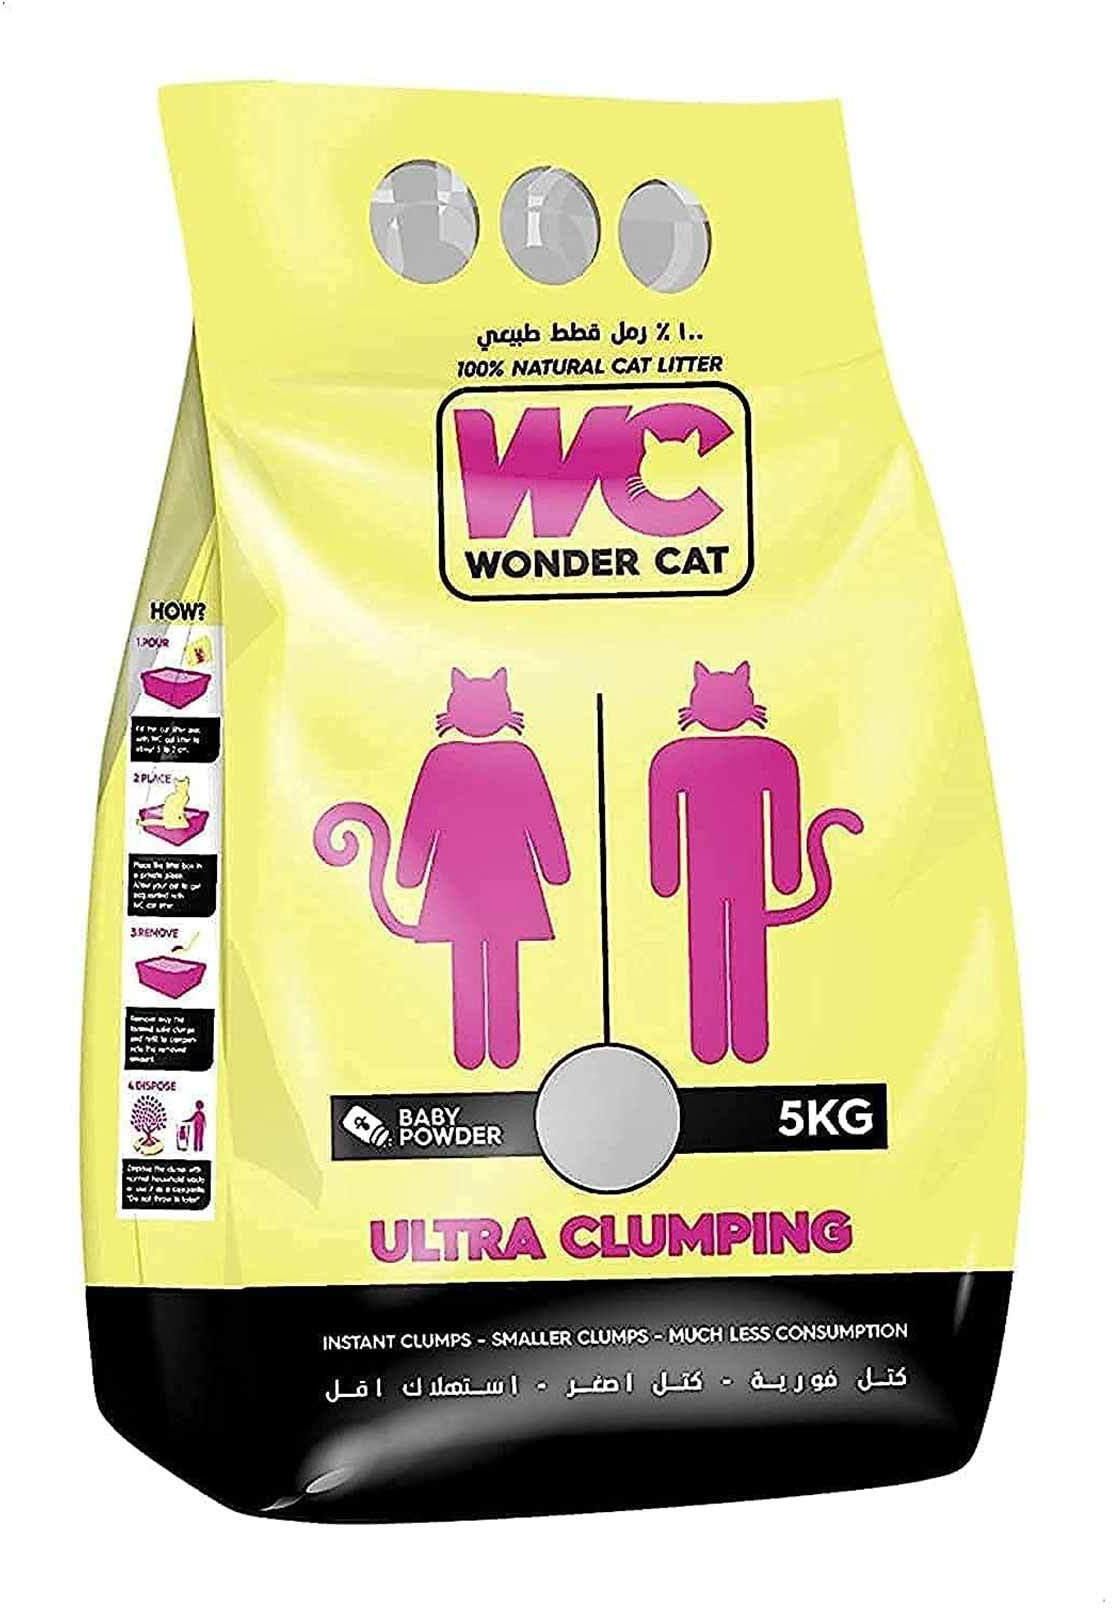 Wonder Cat Ultra-Clumping Cat Litter with Baby Powder Scent - 5 kg